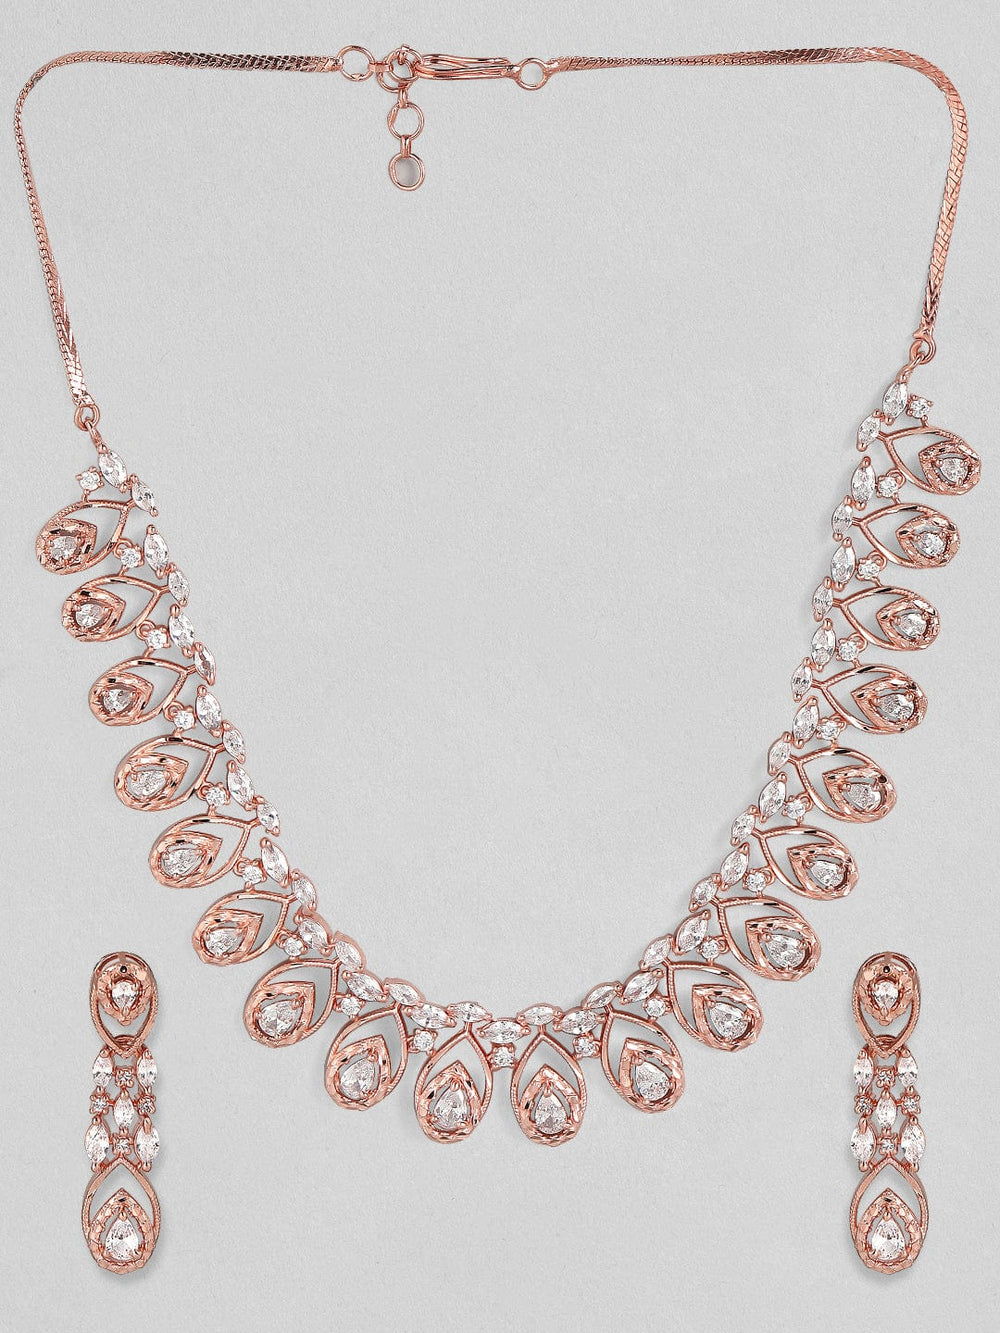 Rubans Zircon Studded Handcrafted Rose Gold Plated Statement Necklace Set Necklace Set